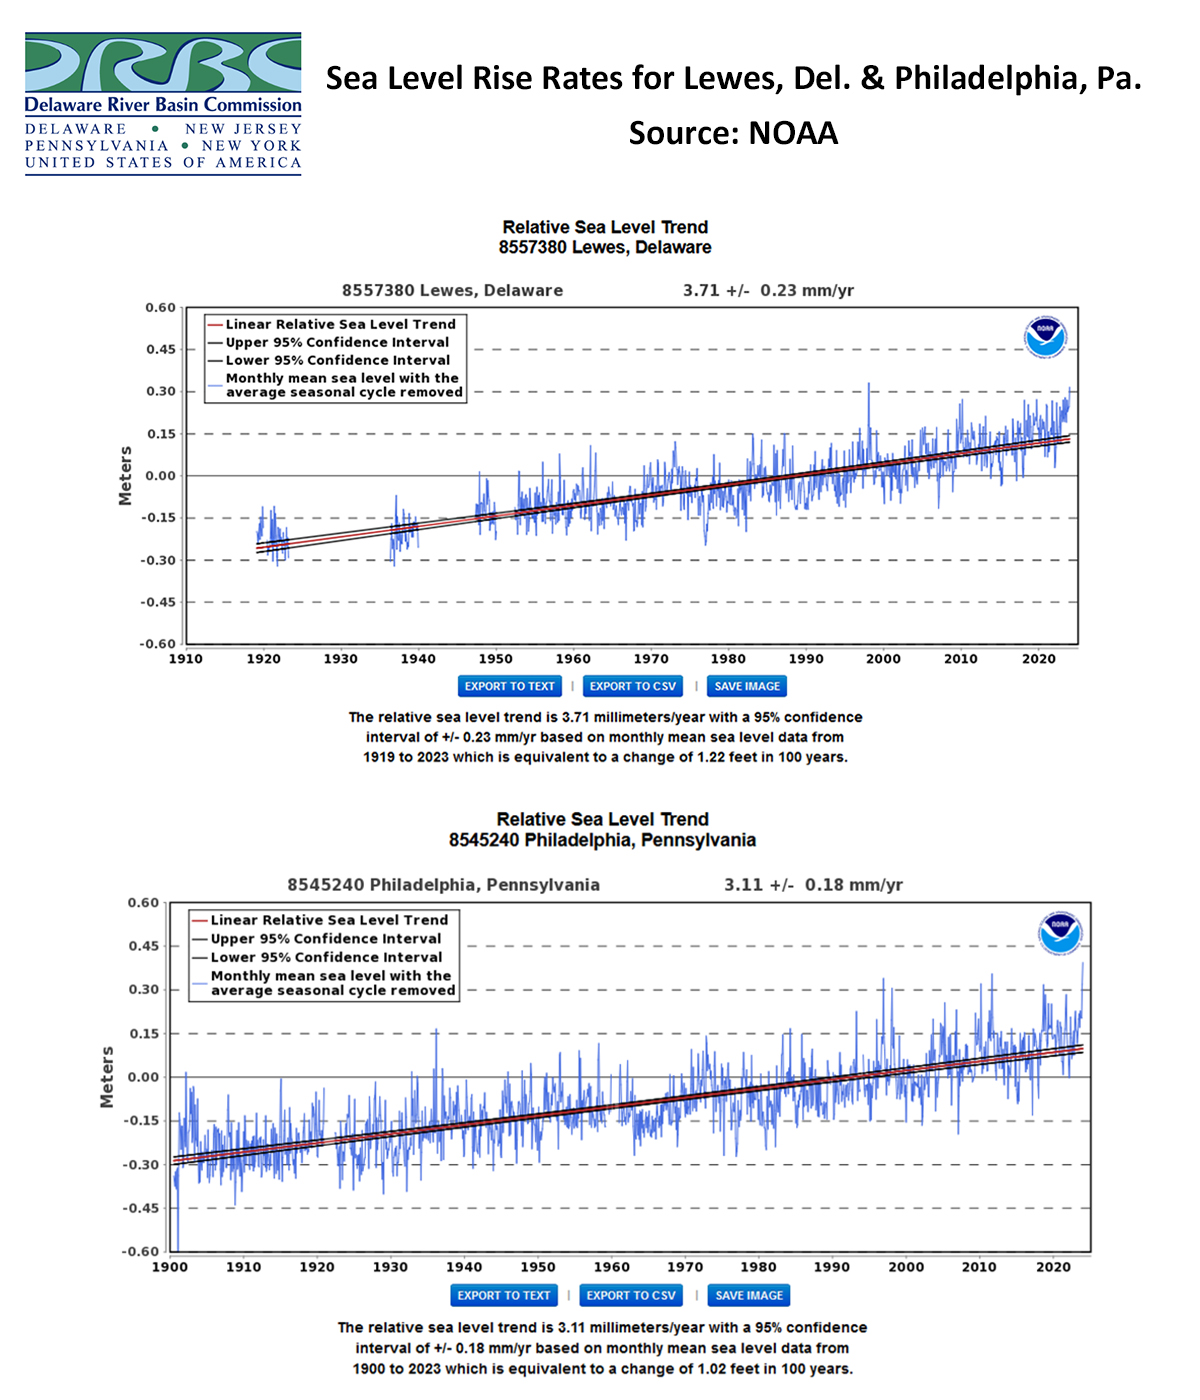 Rates in Sea Level Rise at Lewes, Del. and Philadelphia, Pa. Data: NOAA; Graphic: DRBC.